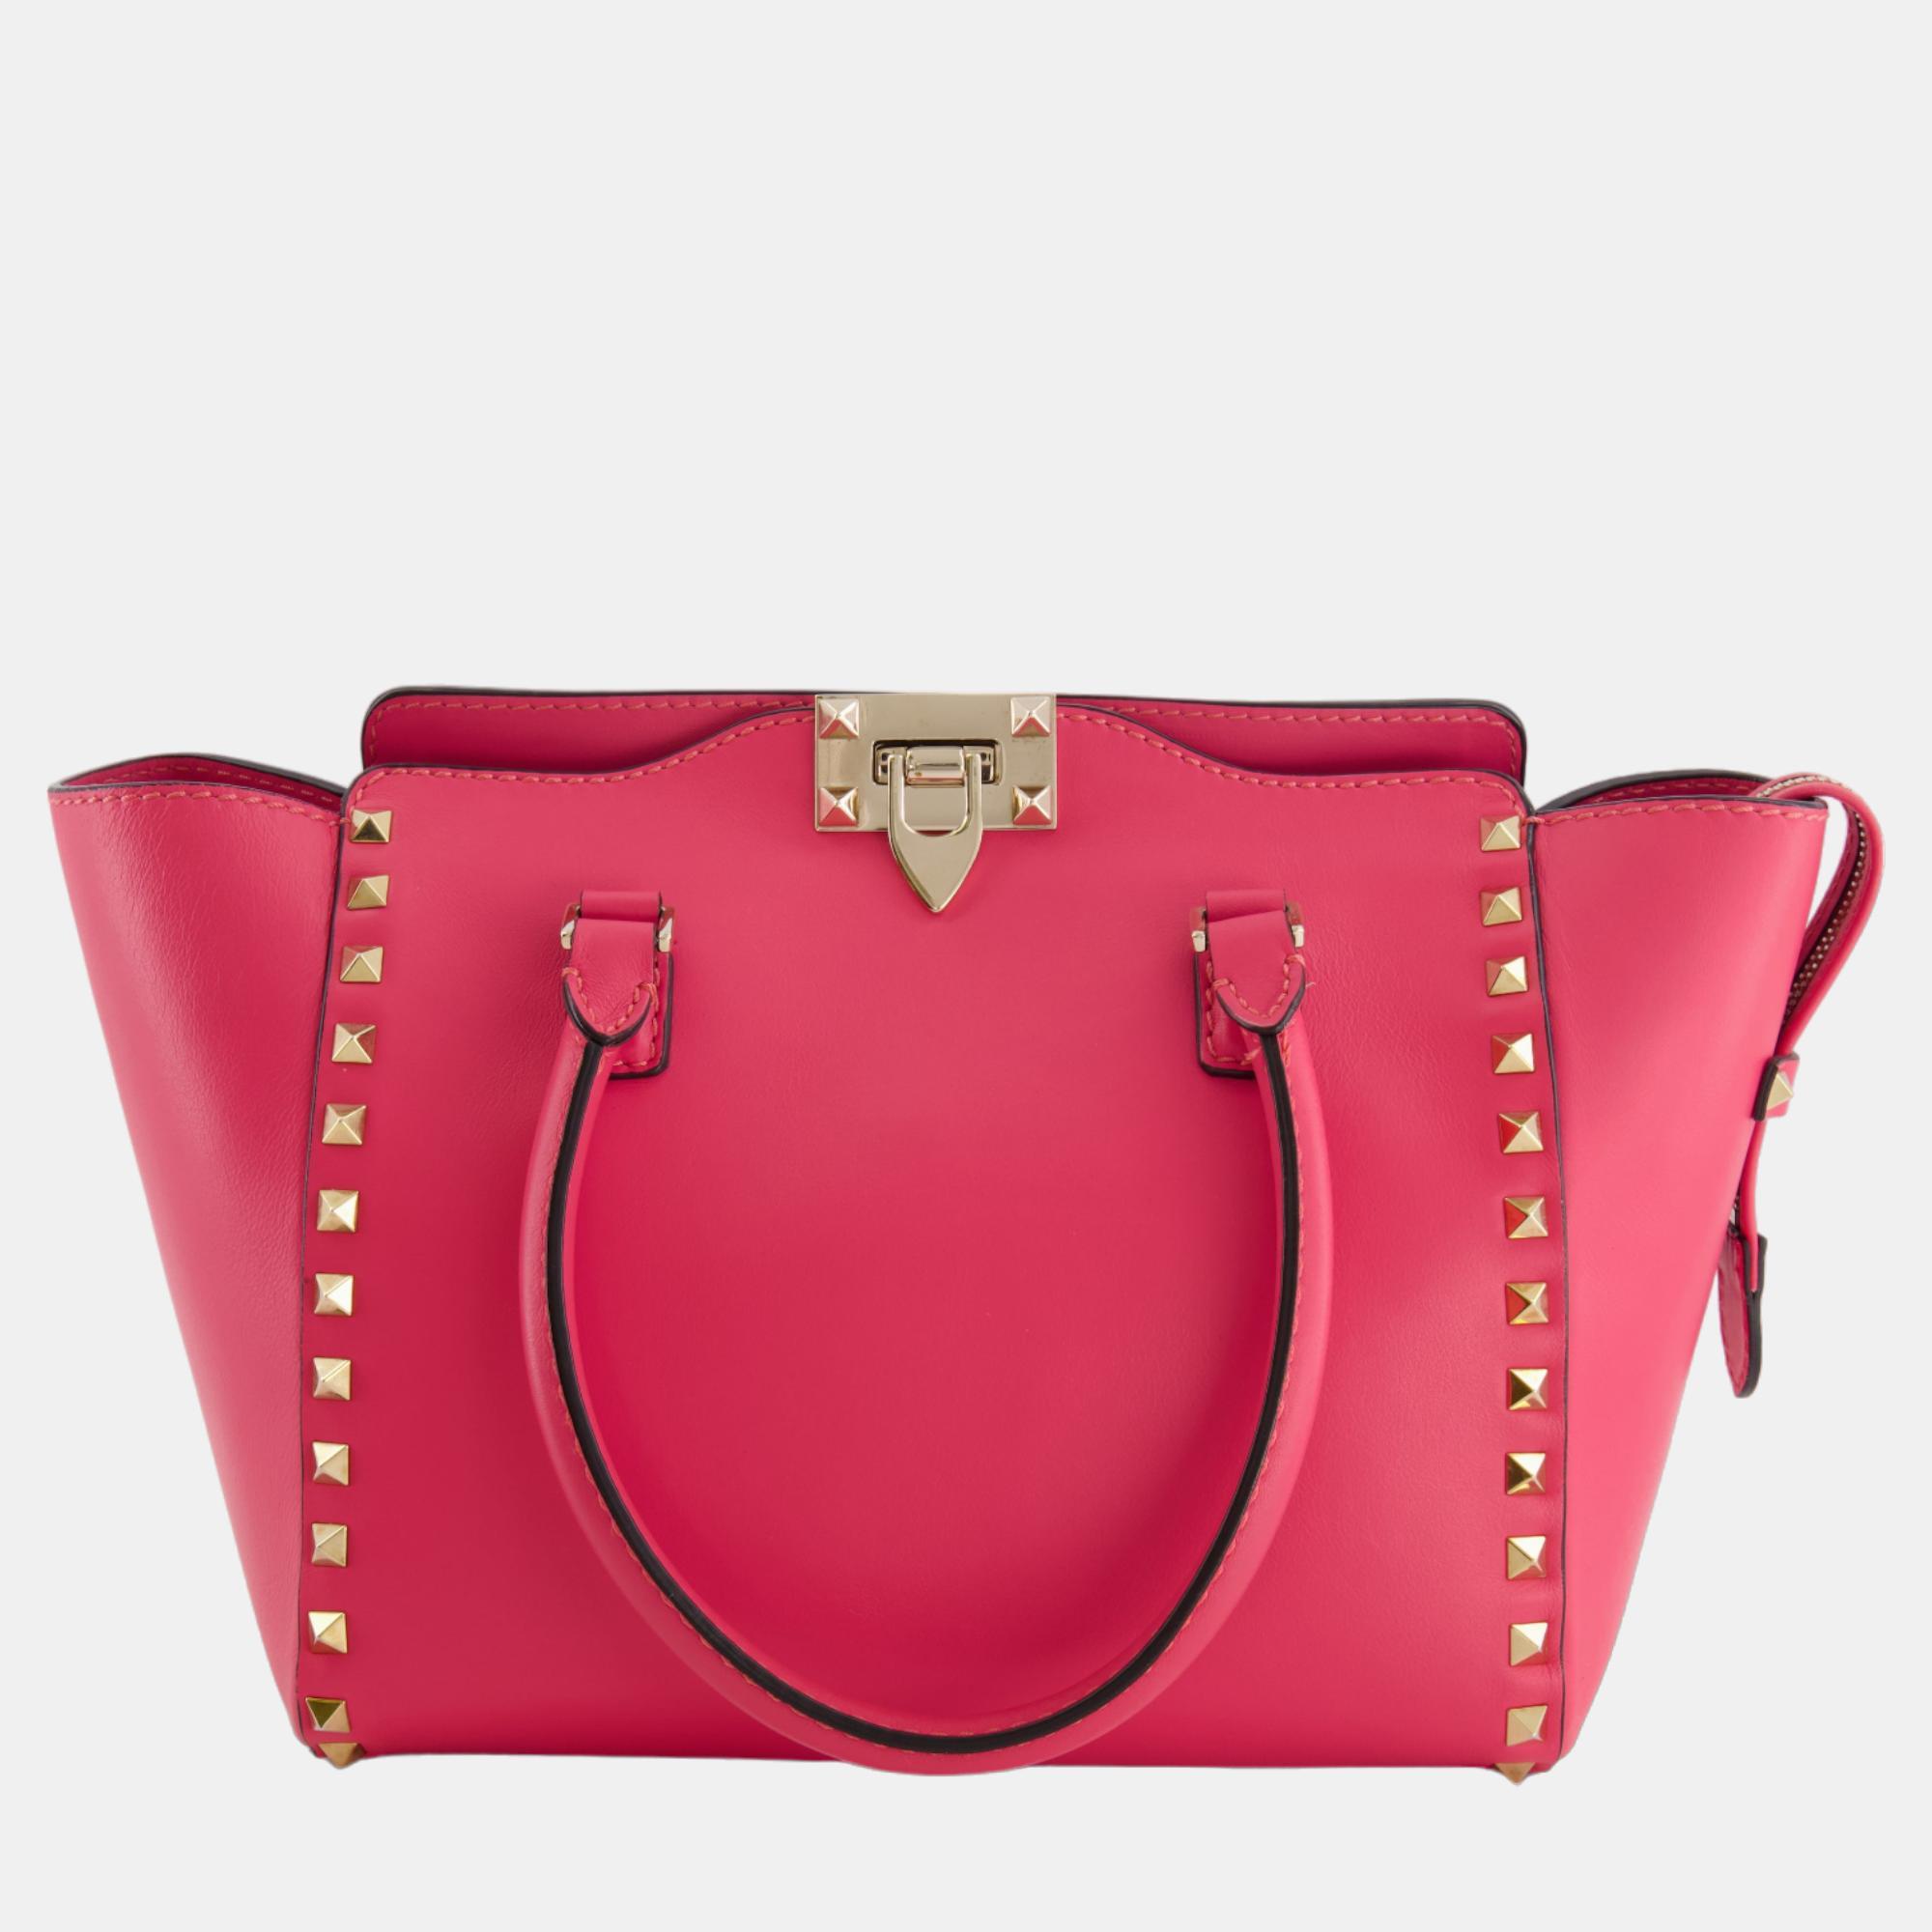 Valentino Hot Pink Rockstud Small Tote Bag With Champagne Gold Hardware